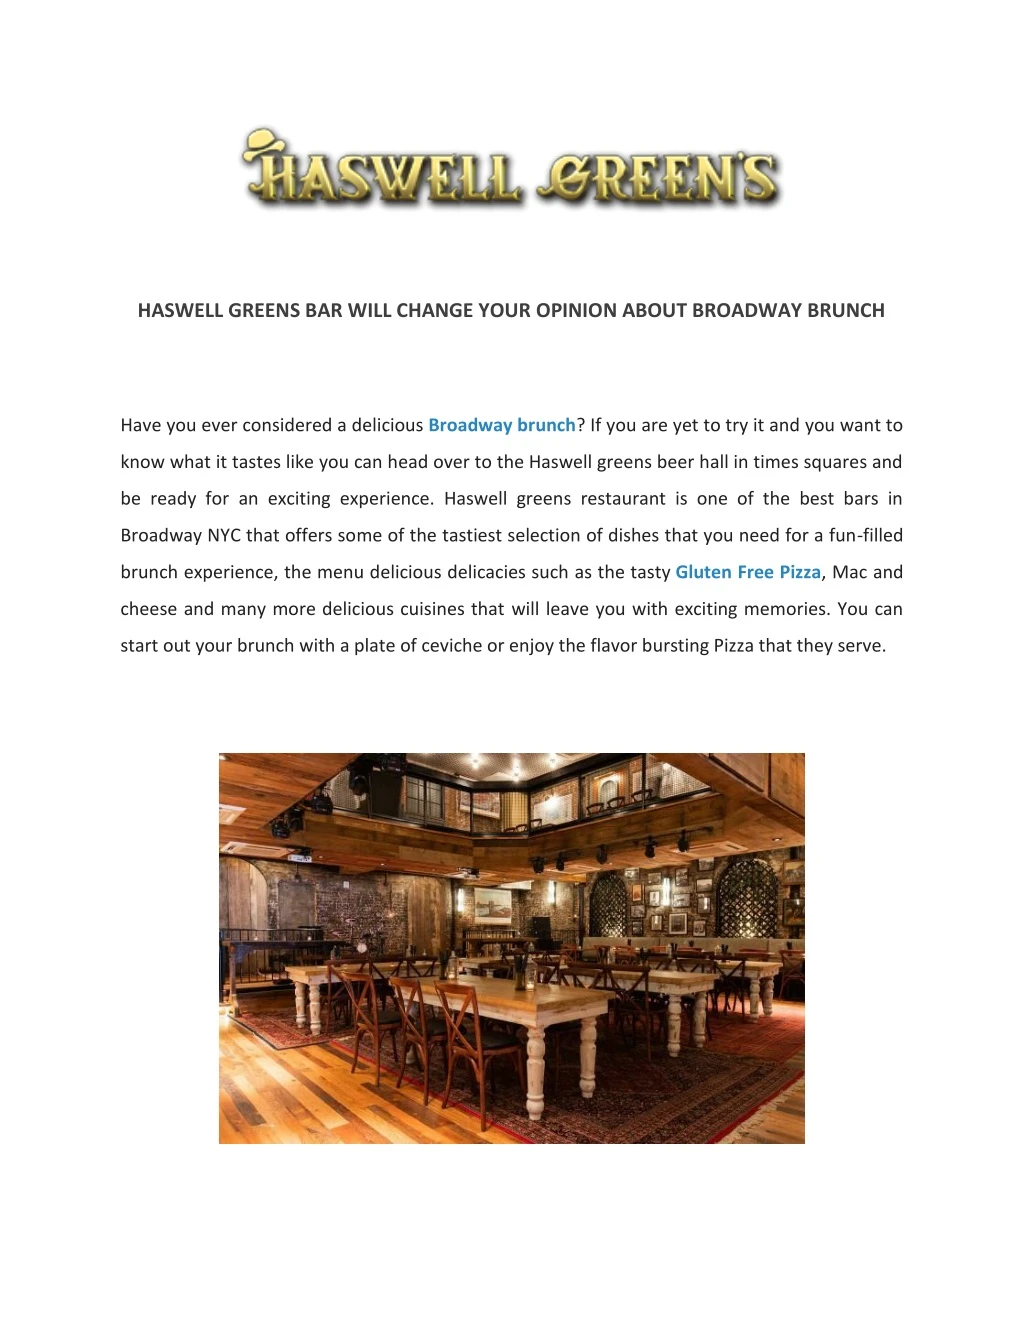 haswell greens bar will change your opinion about